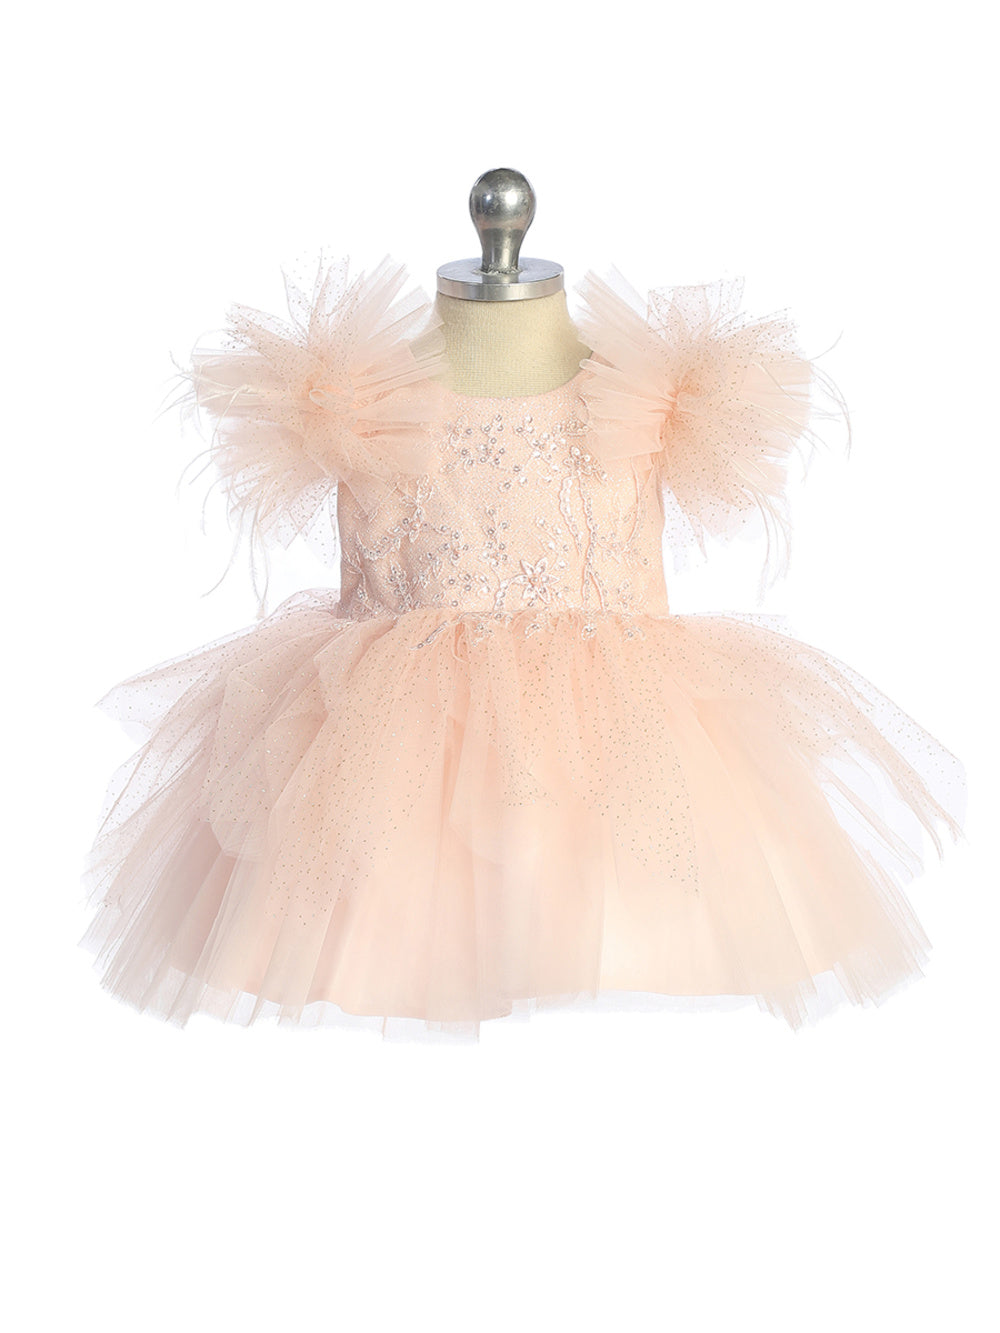 Girls glitter bodice with lace applique and fluffy sleeves with feathers